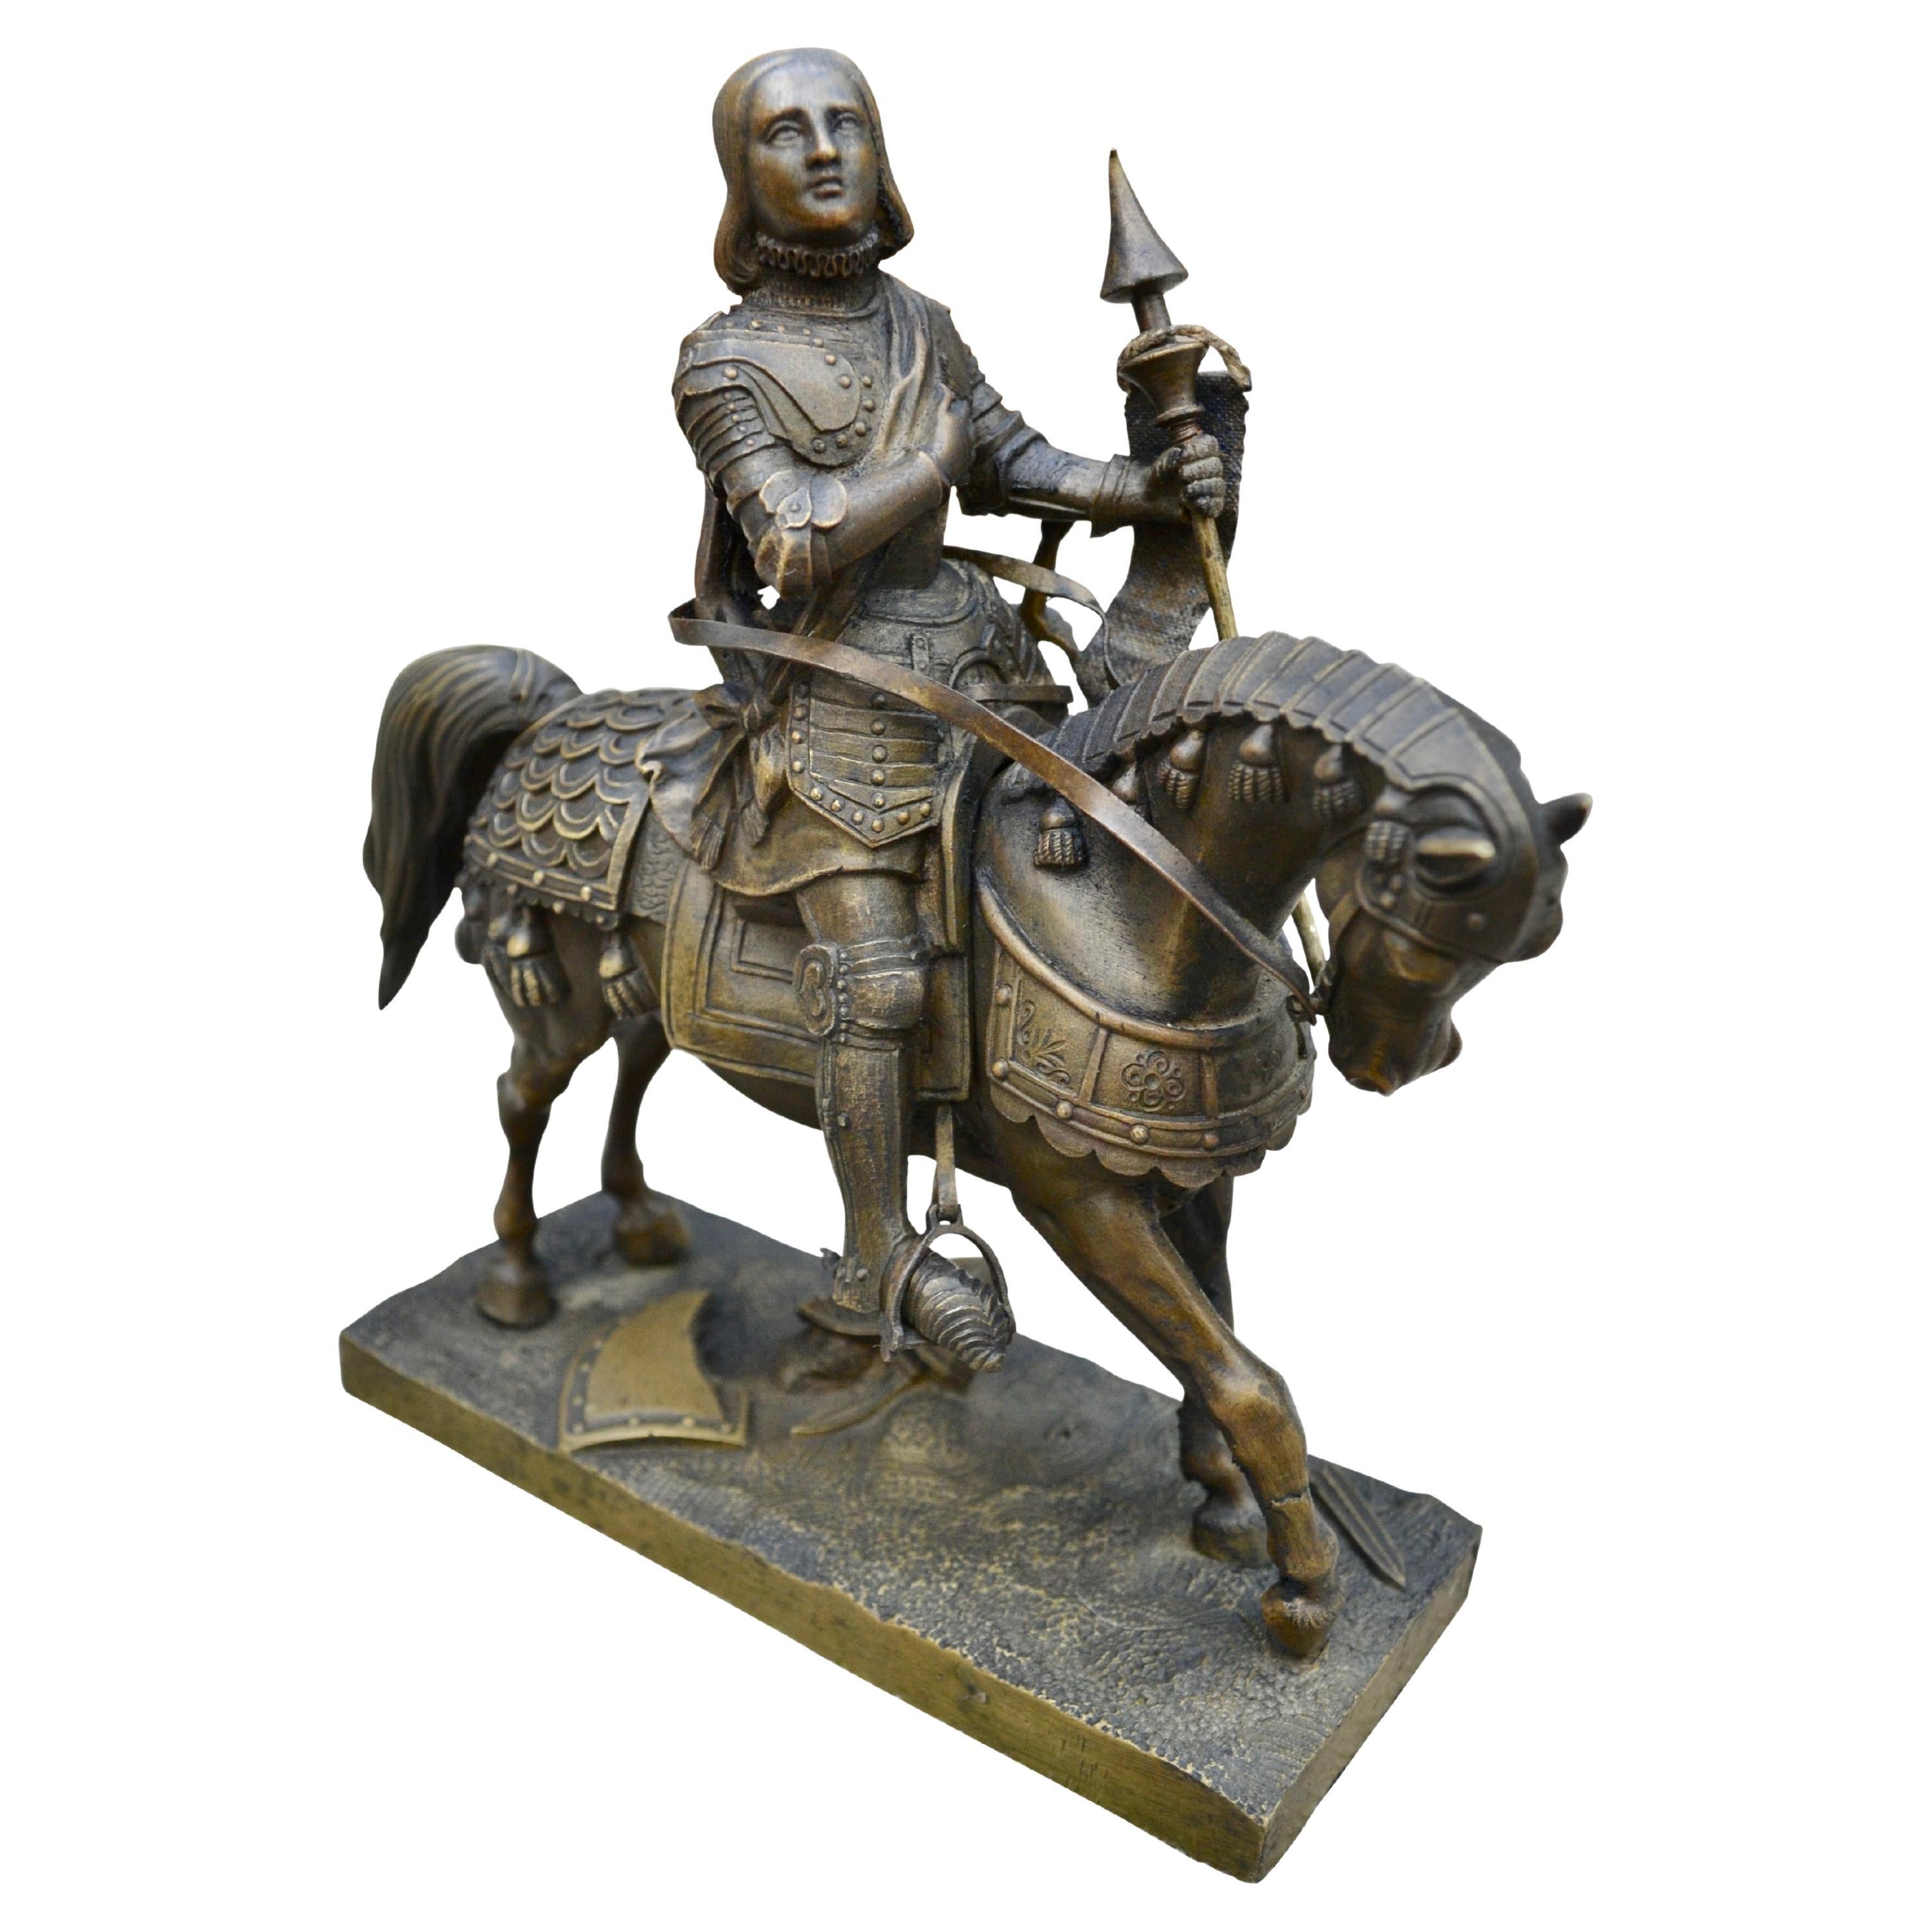 An small but exquisitely cast and highly detailed bronze statue of St Joan of Arc in full body  battle armour including the horse with one hand holding a standard and the other hand resting on her heart. Her sword is still in its sheath hanging by